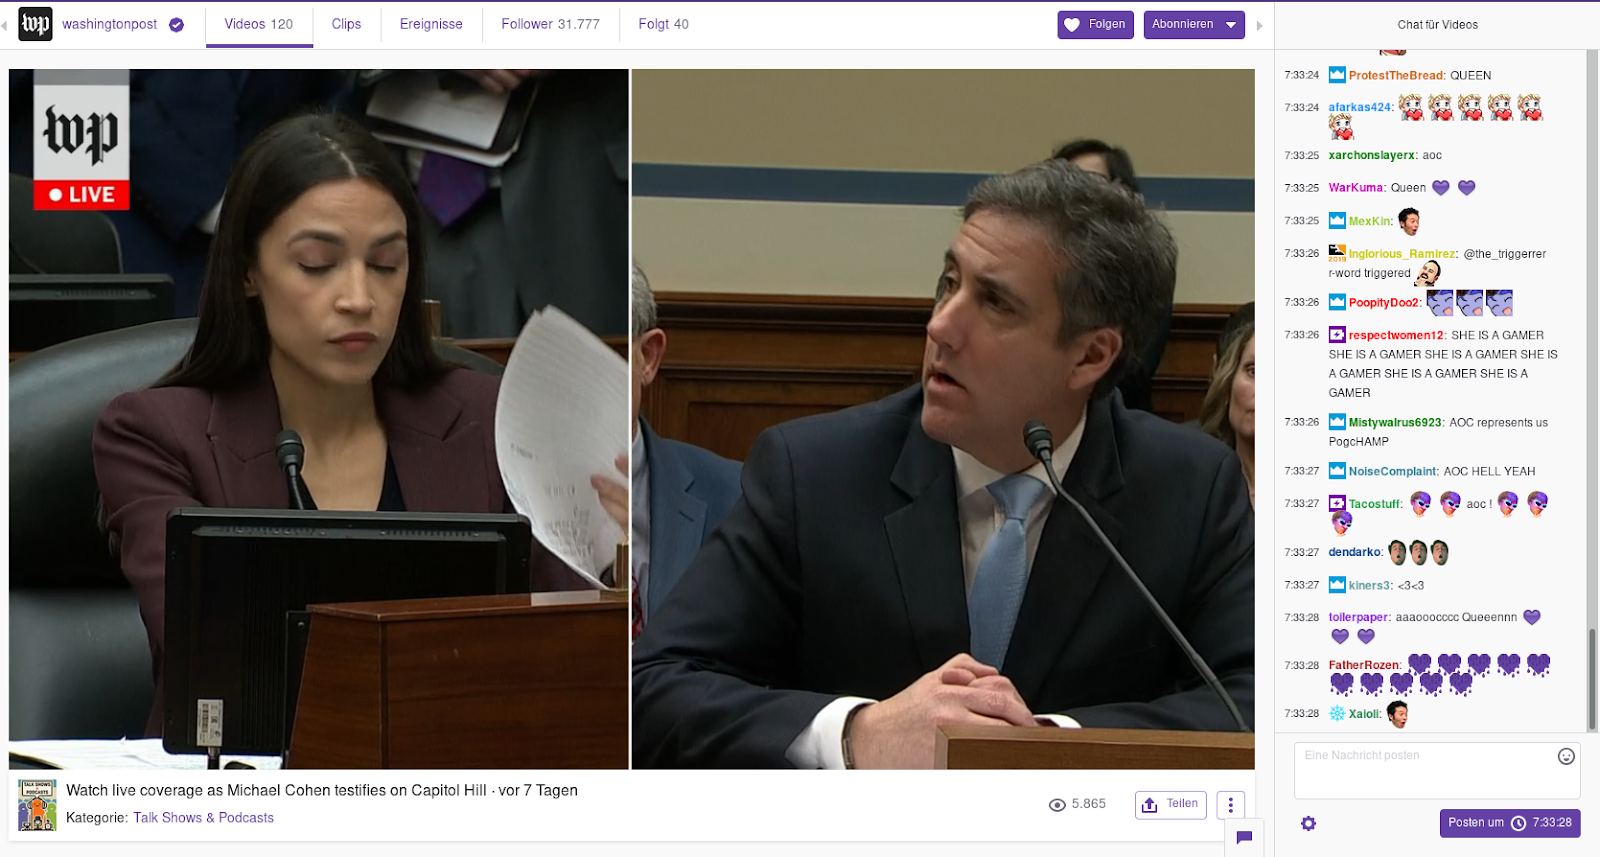 Fig. 2: Washington Post congress live stream of Michael Cohen’s testimony from Feb. 27, 2019, on Twitch.tv